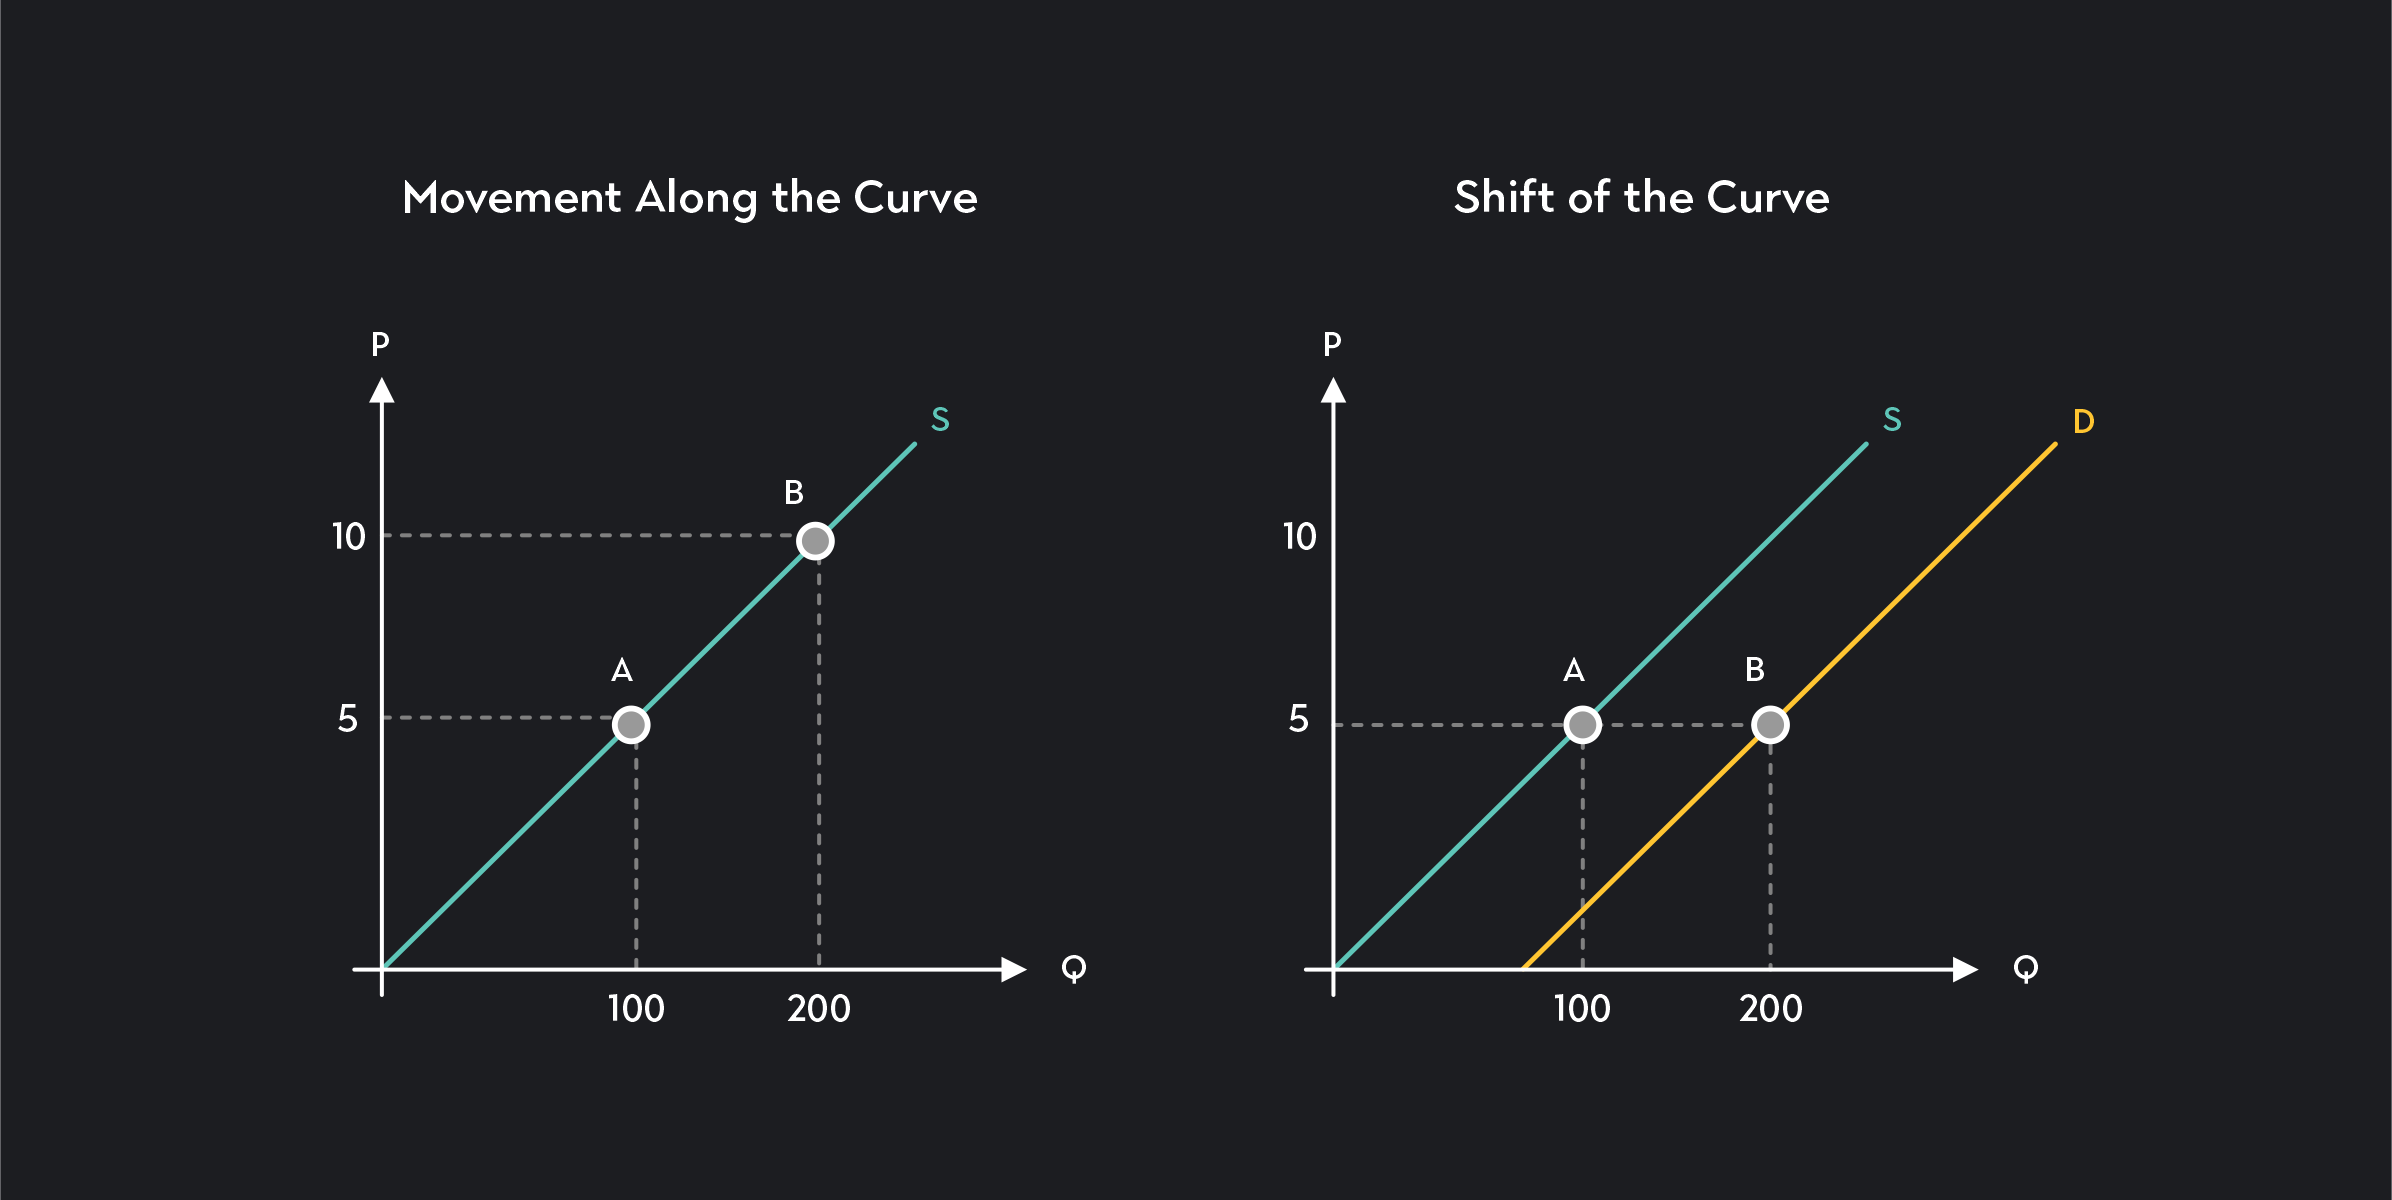 Graph showing movement along the supply curve and a shift of the curve